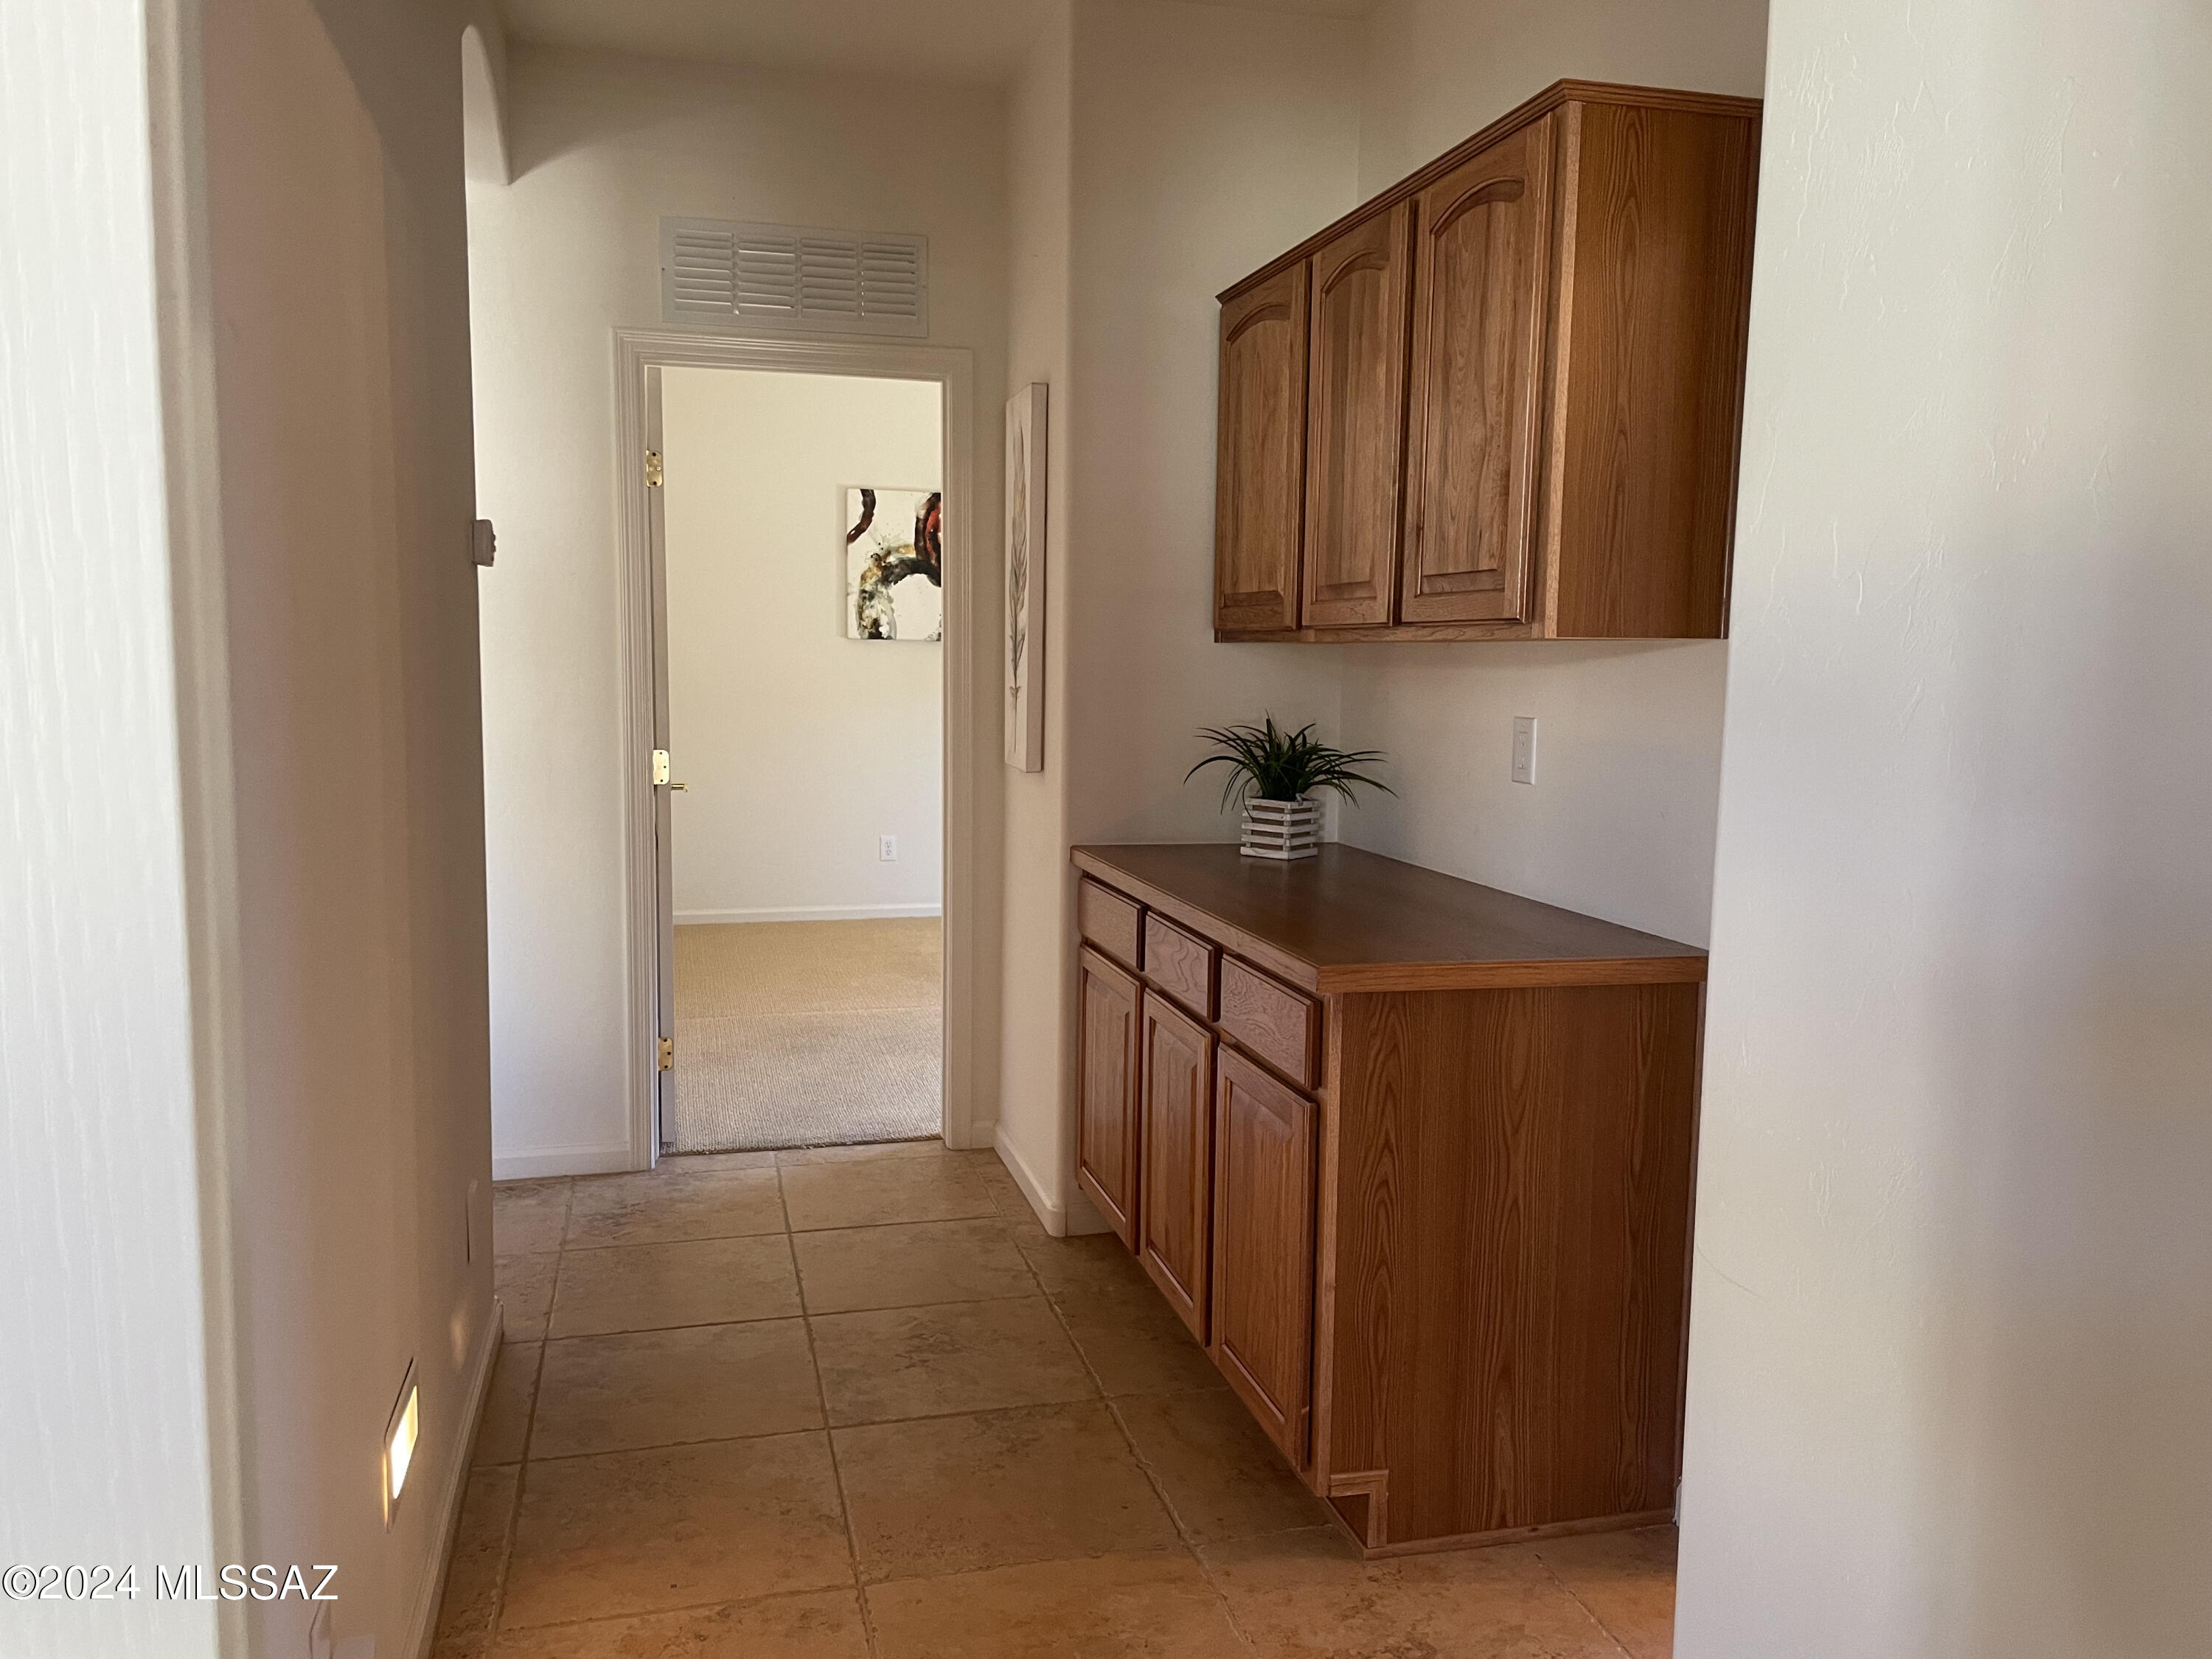 37656 S Terrace Park Drive, Saddlebrooke, Arizona, 85739, United States, 3 Bedrooms Bedrooms, ,3 BathroomsBathrooms,Residential,For Sale,37656 S Terrace Park Drive,1511184